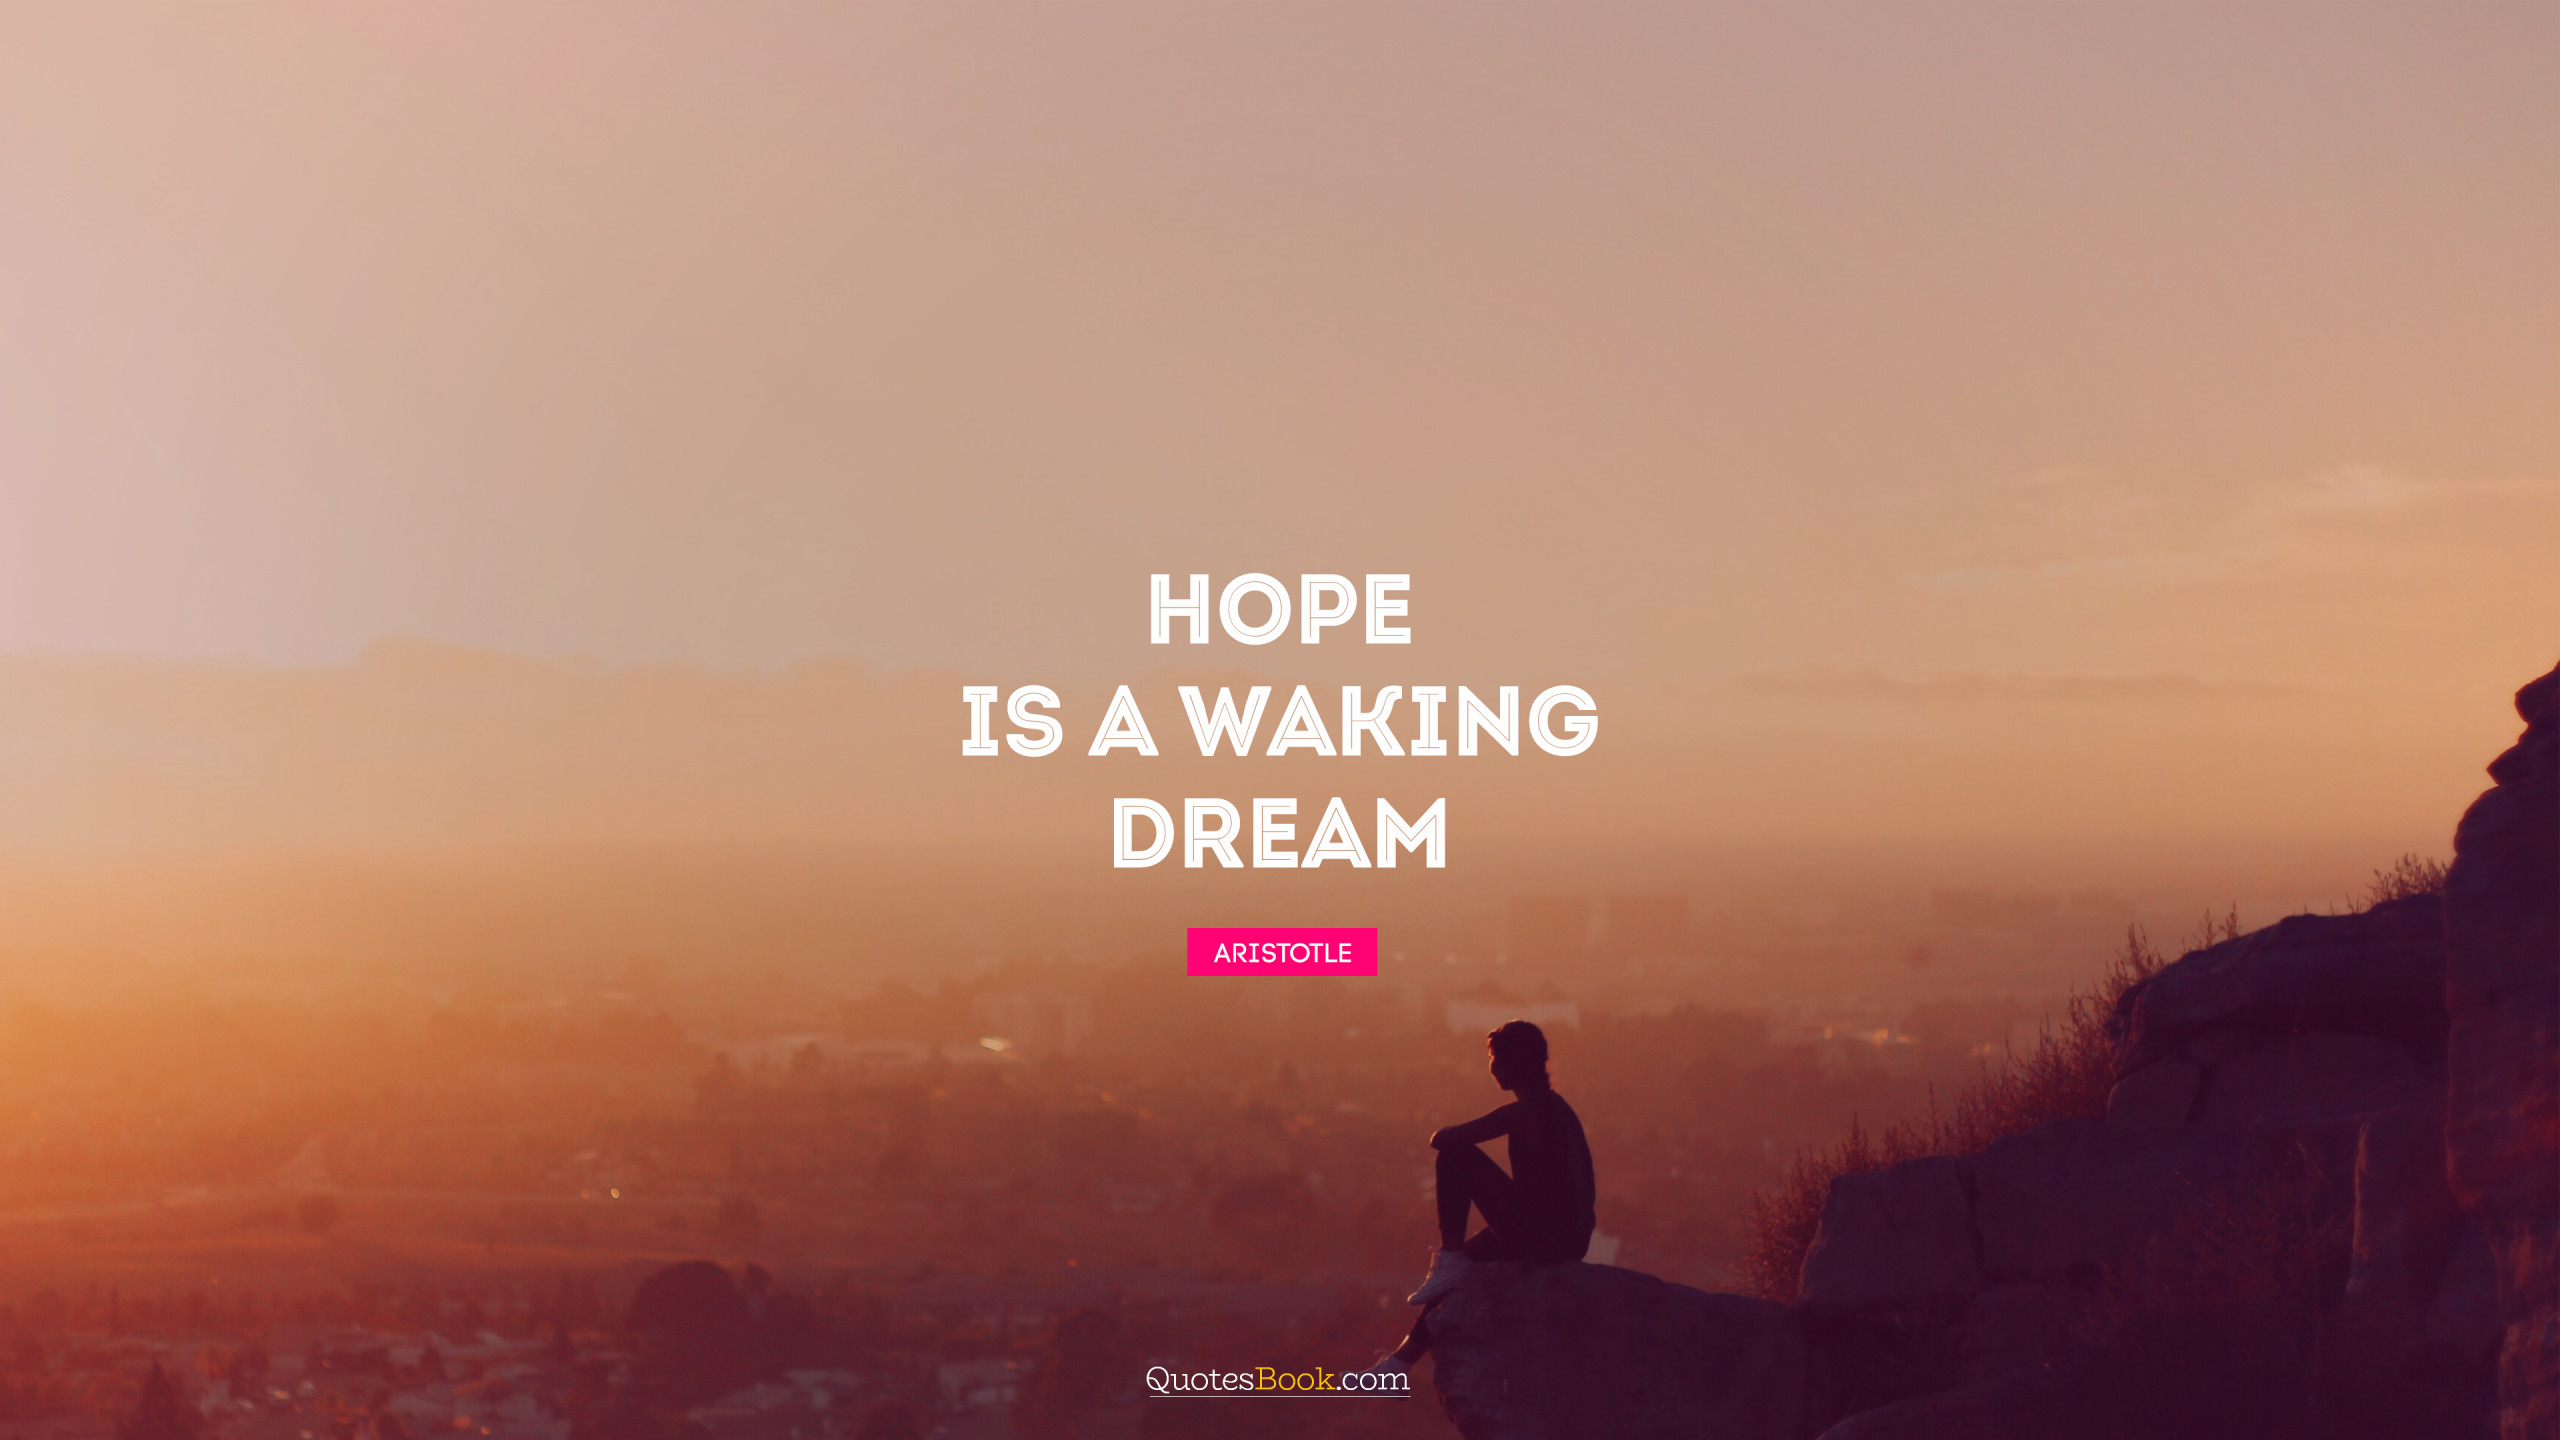 Hope is a waking dream. - Quote by Aristotle - QuotesBook